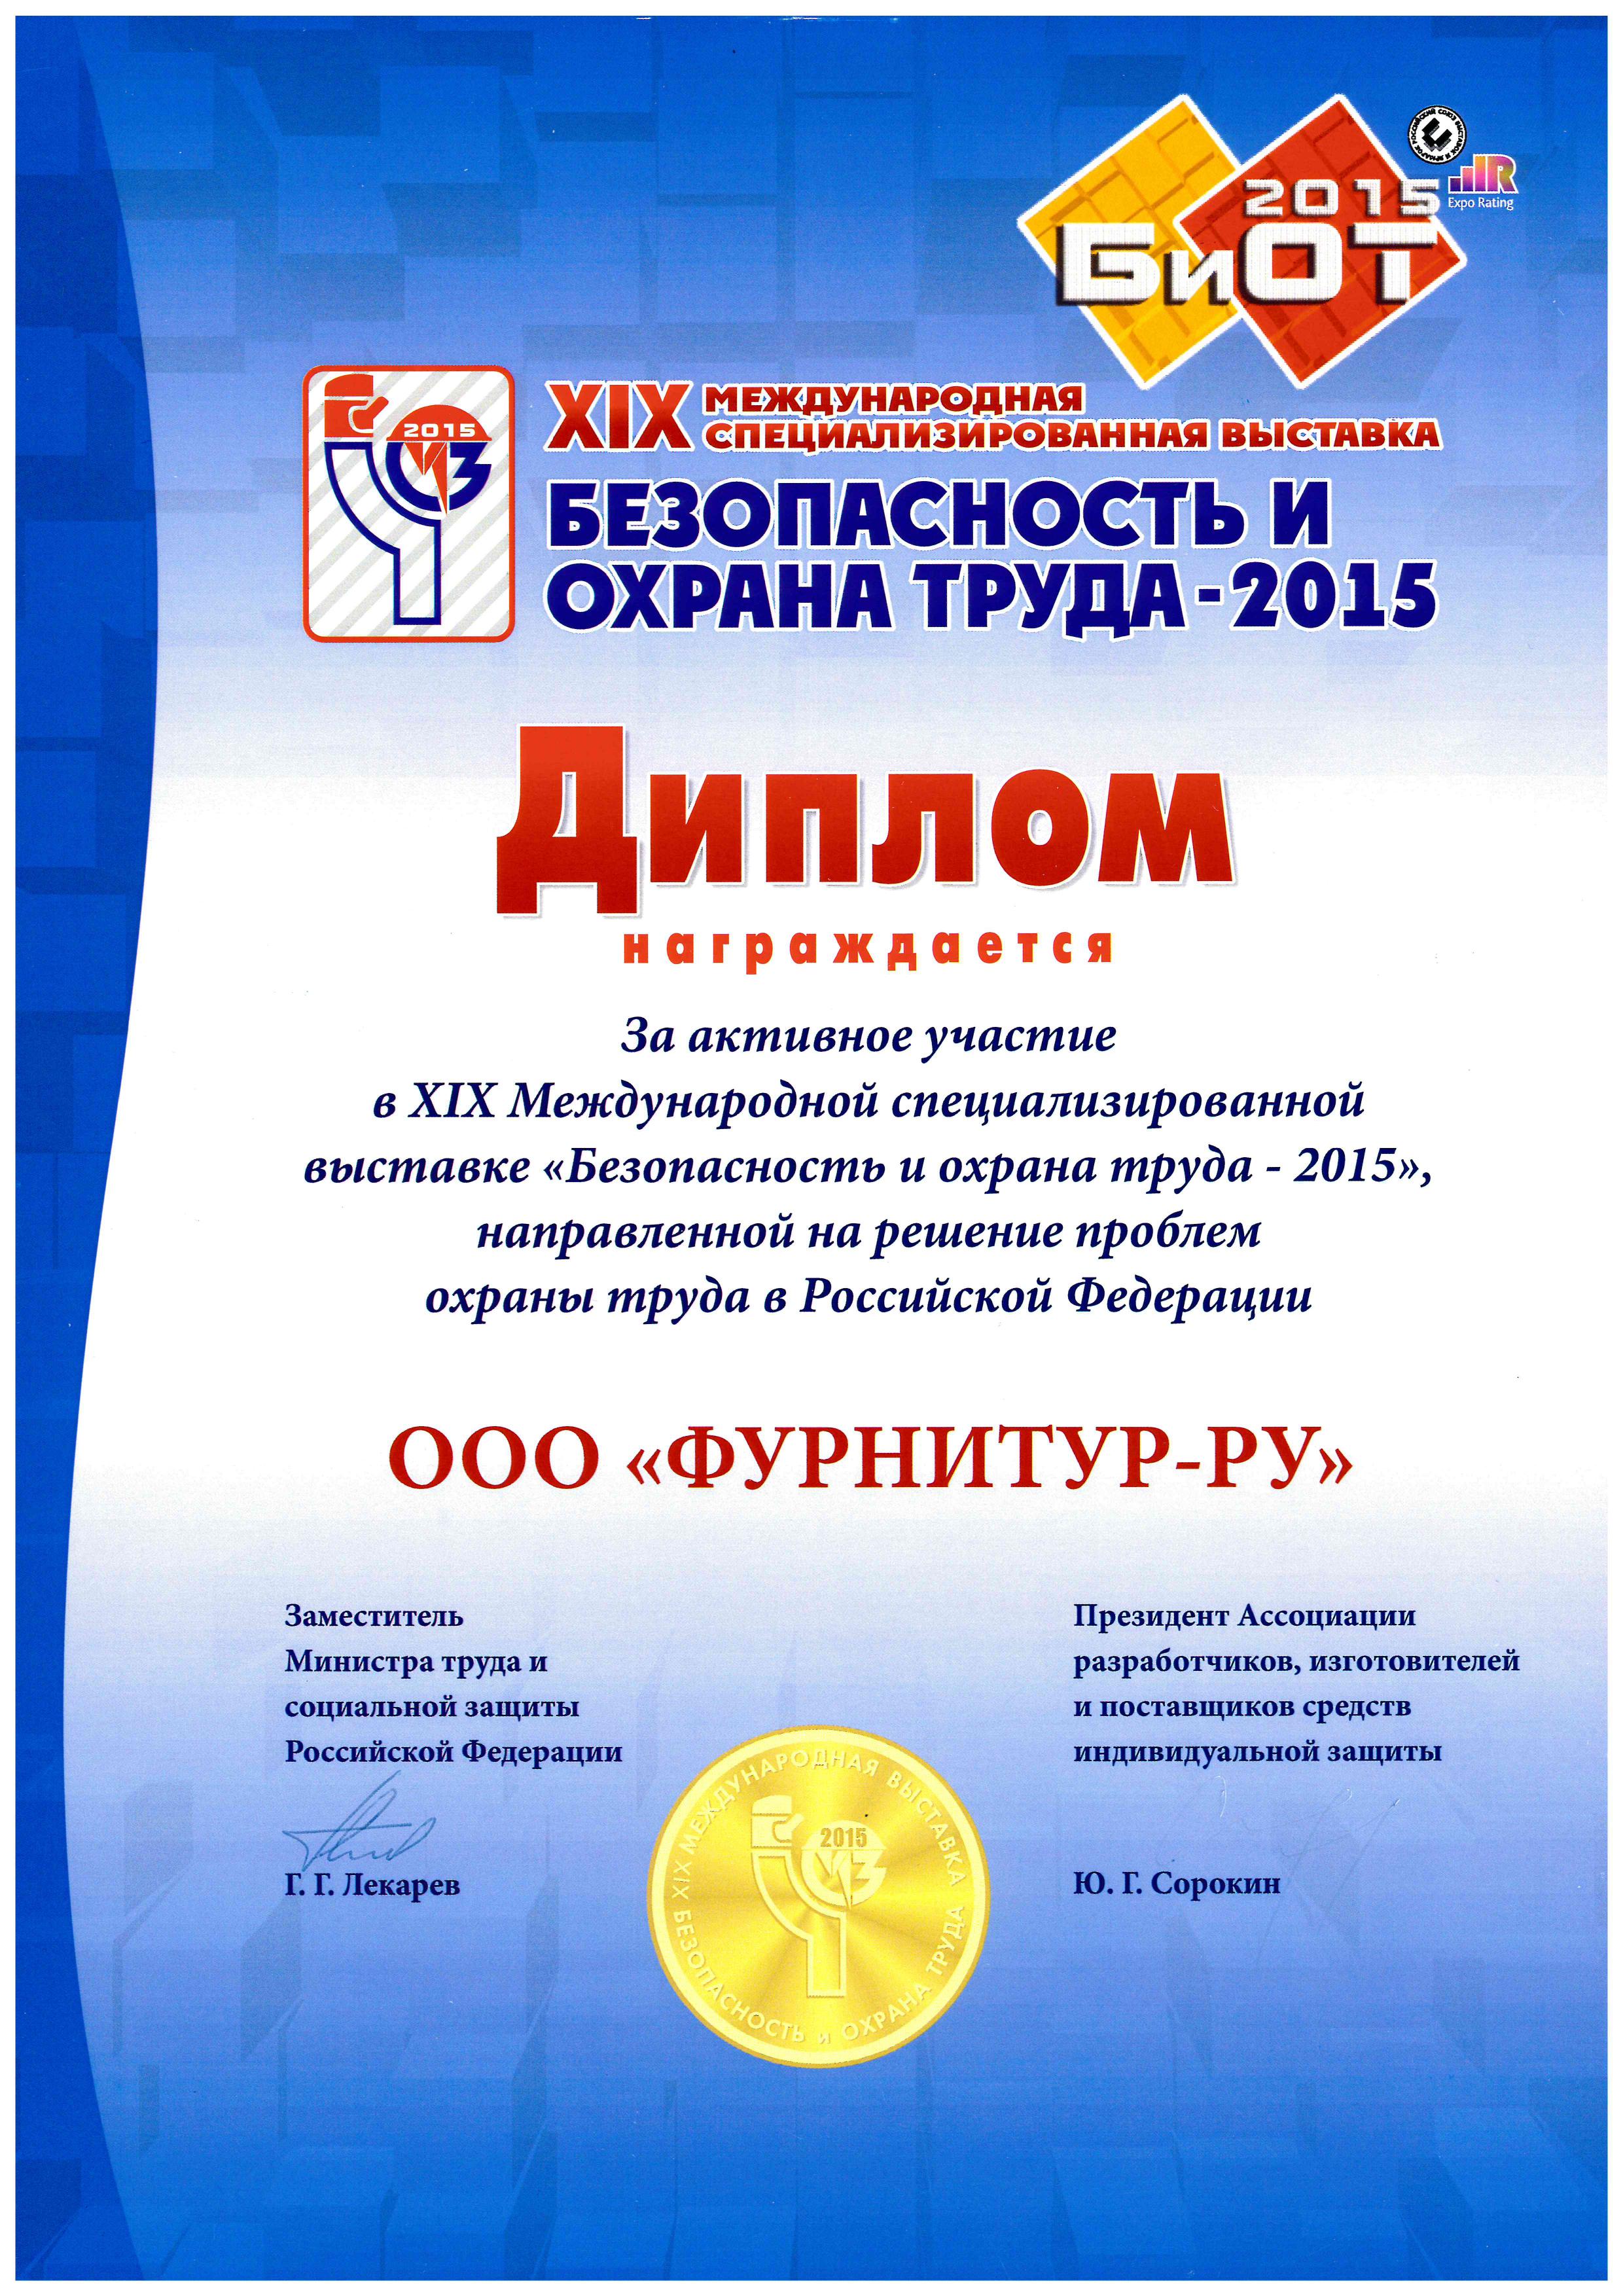 Safety and health 2015 (Moscow)